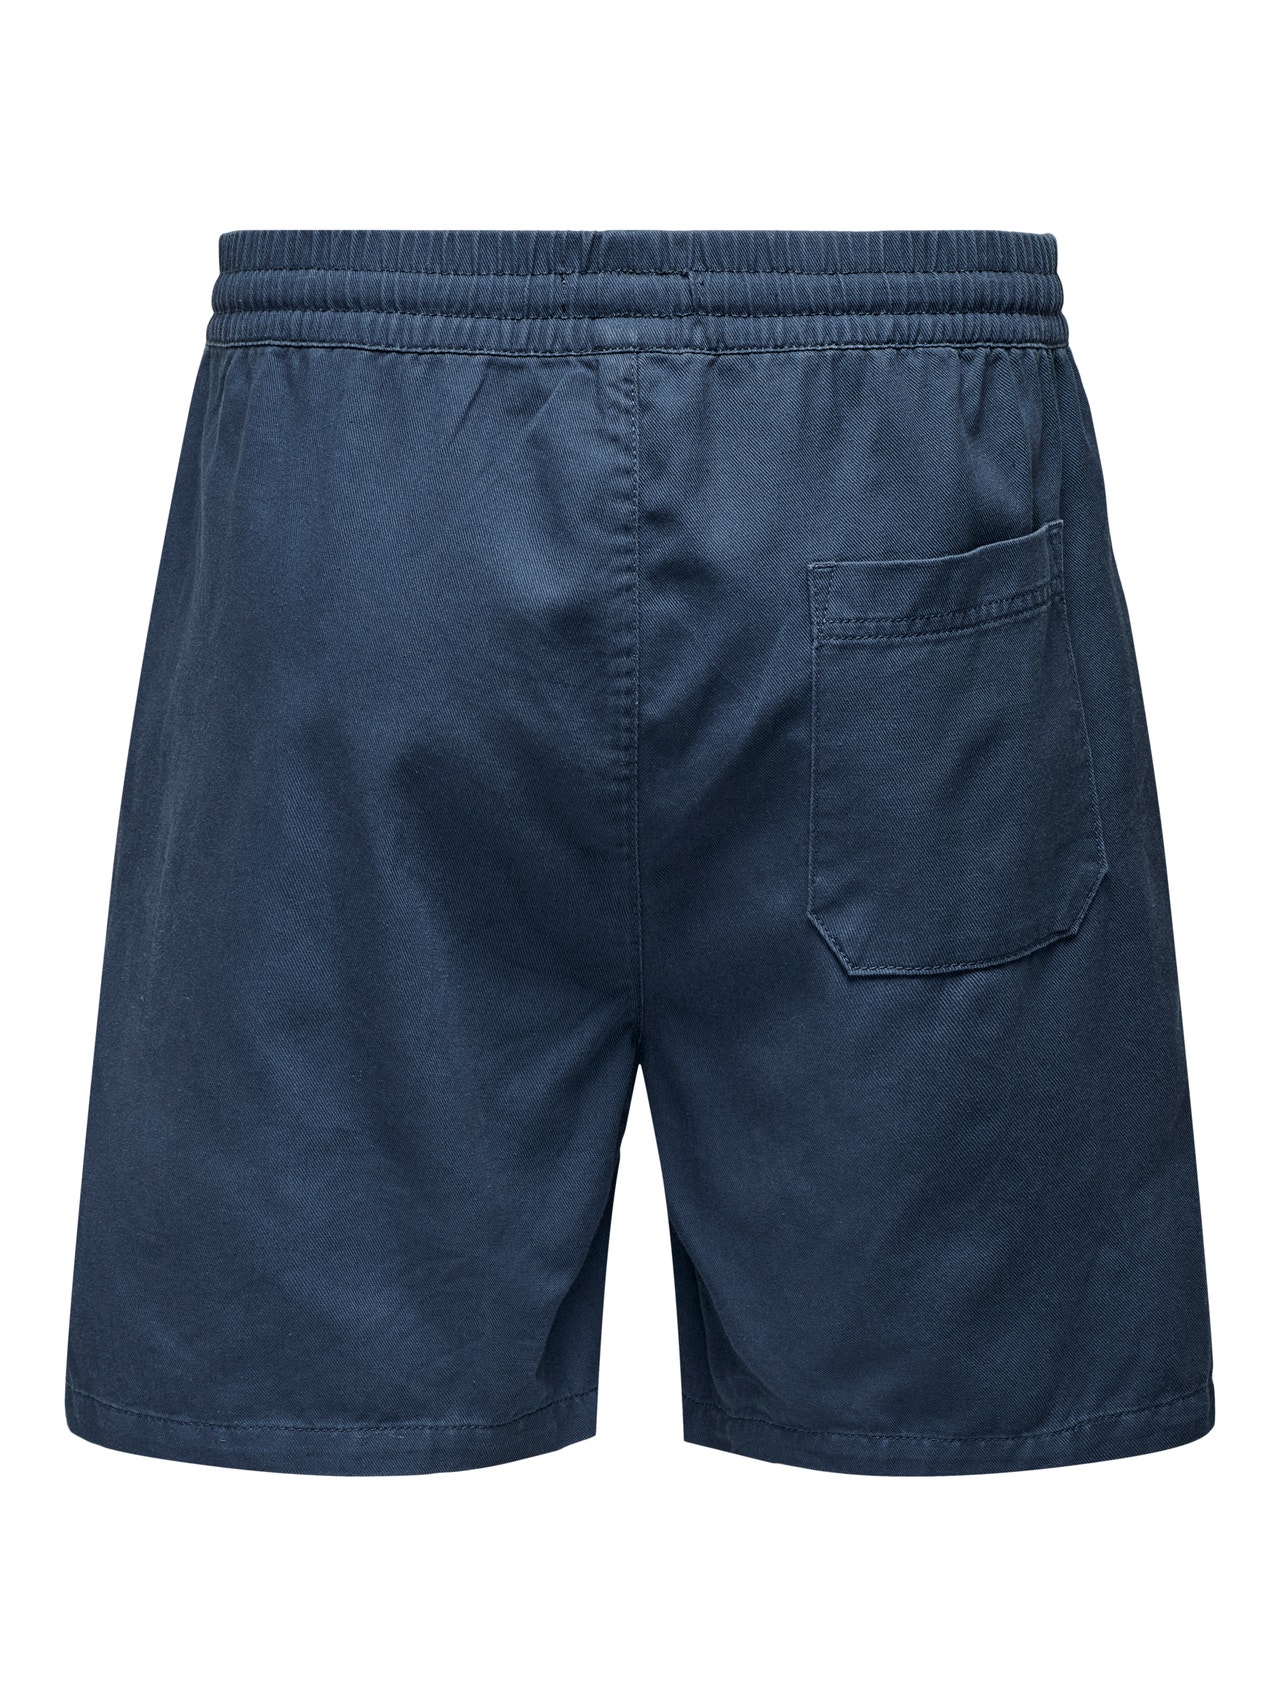 ONLY & SONS Shorts with mid waist -Sargasso Sea - 22025790